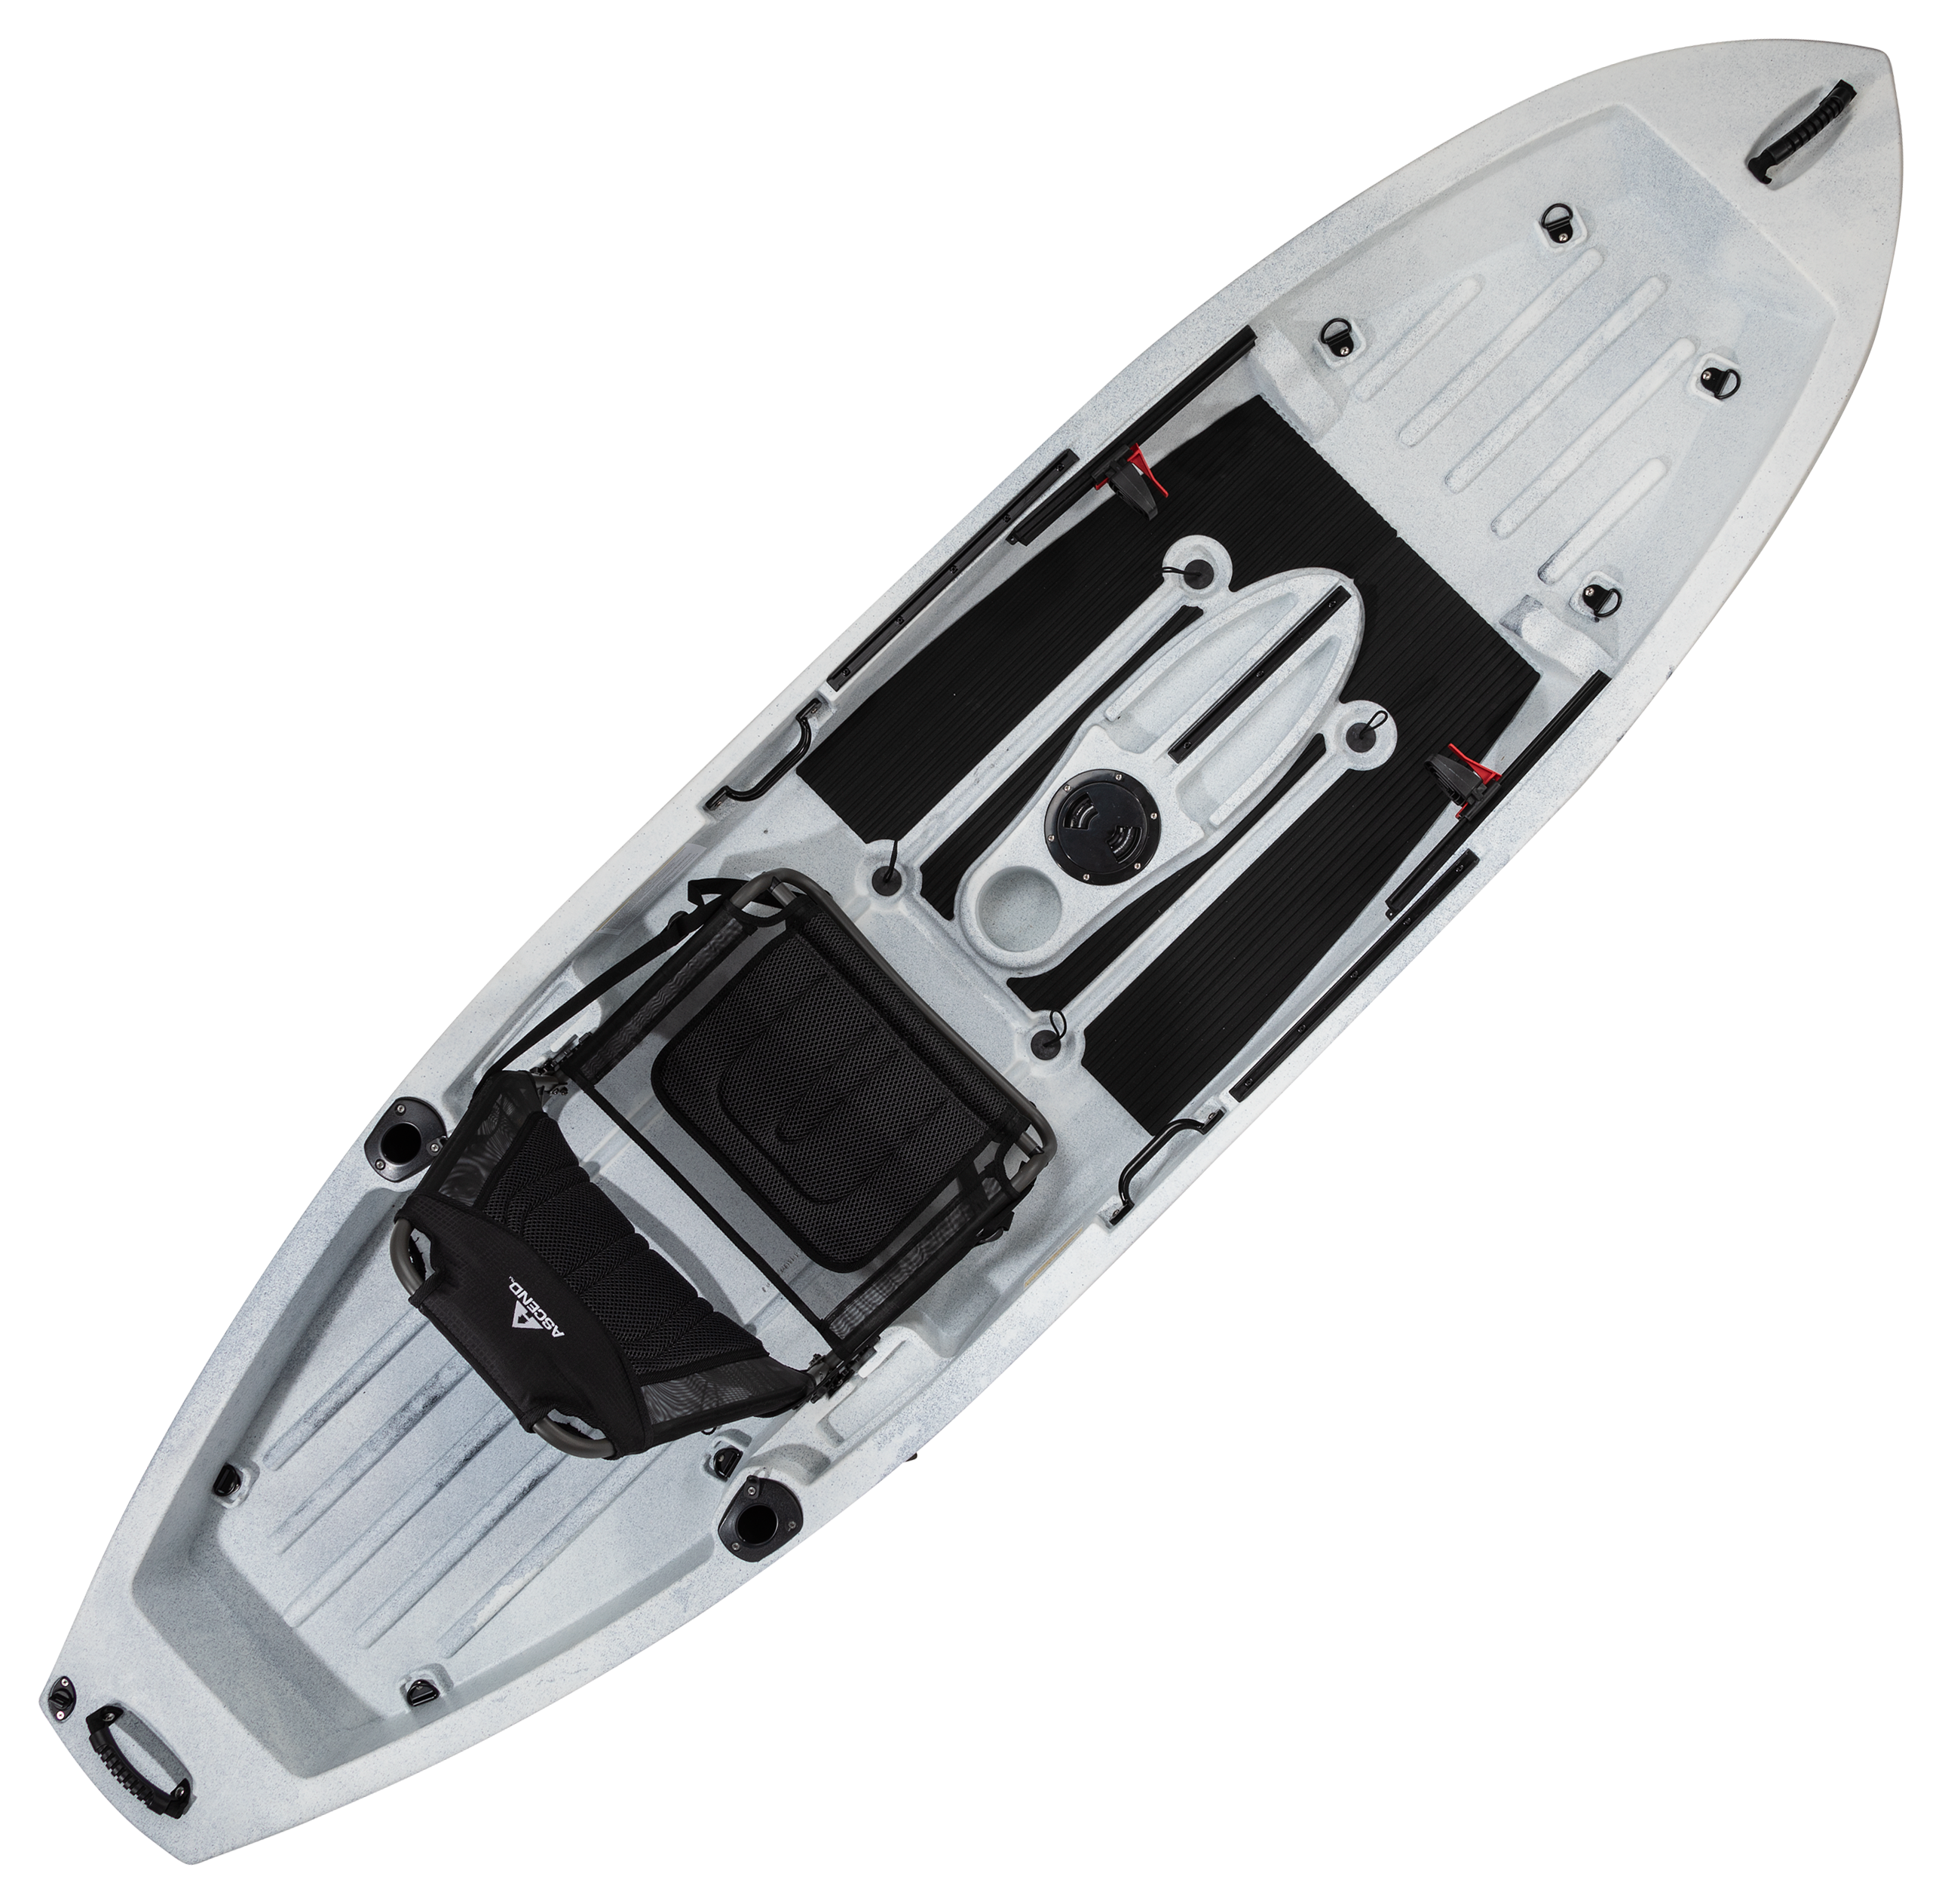 Ascend 10T Sit-On-Top Kayak with Enhanced Seating System